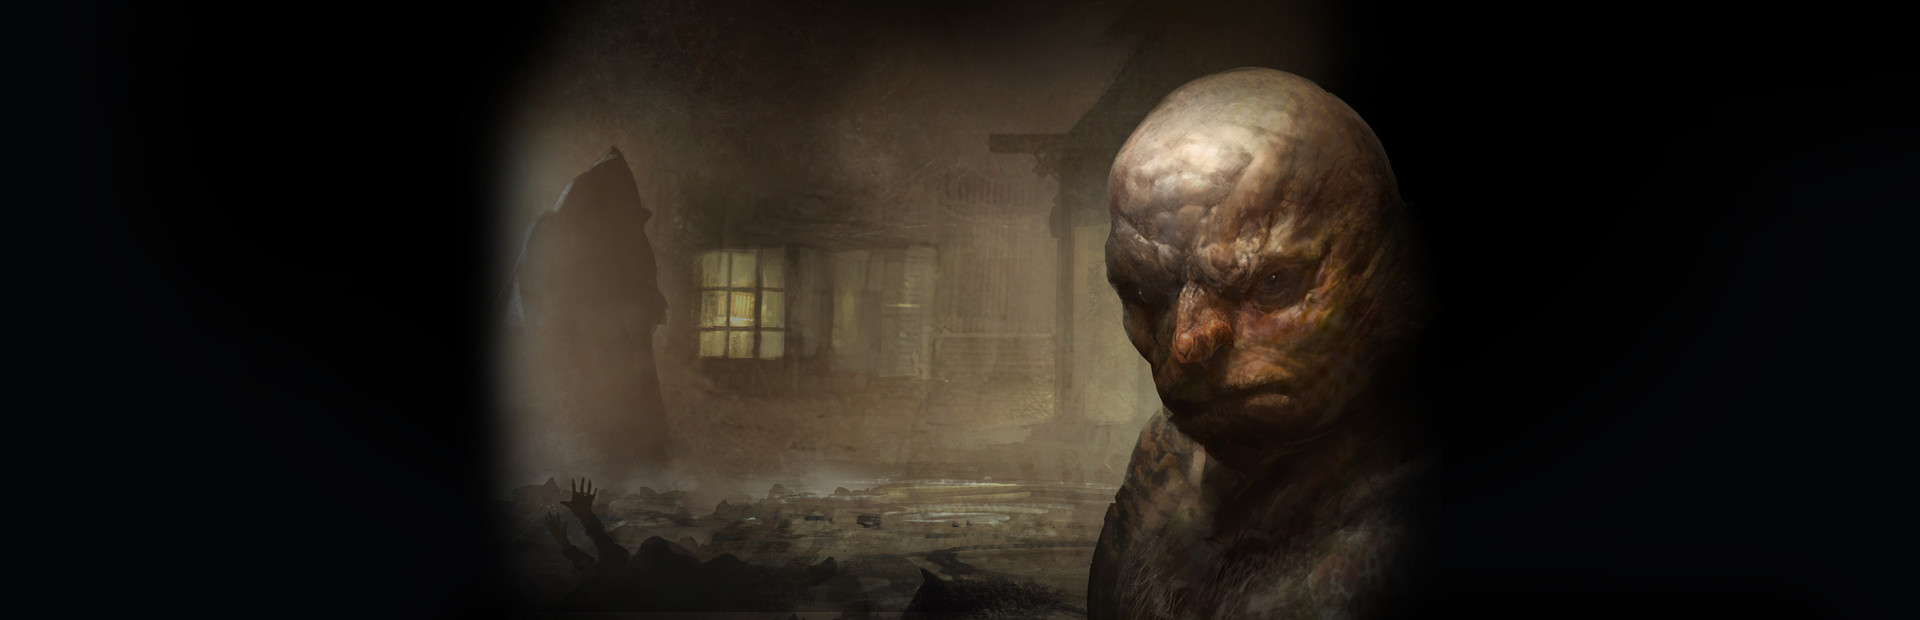 Call of Cthulhu®: Dark Corners of the Earth cover image